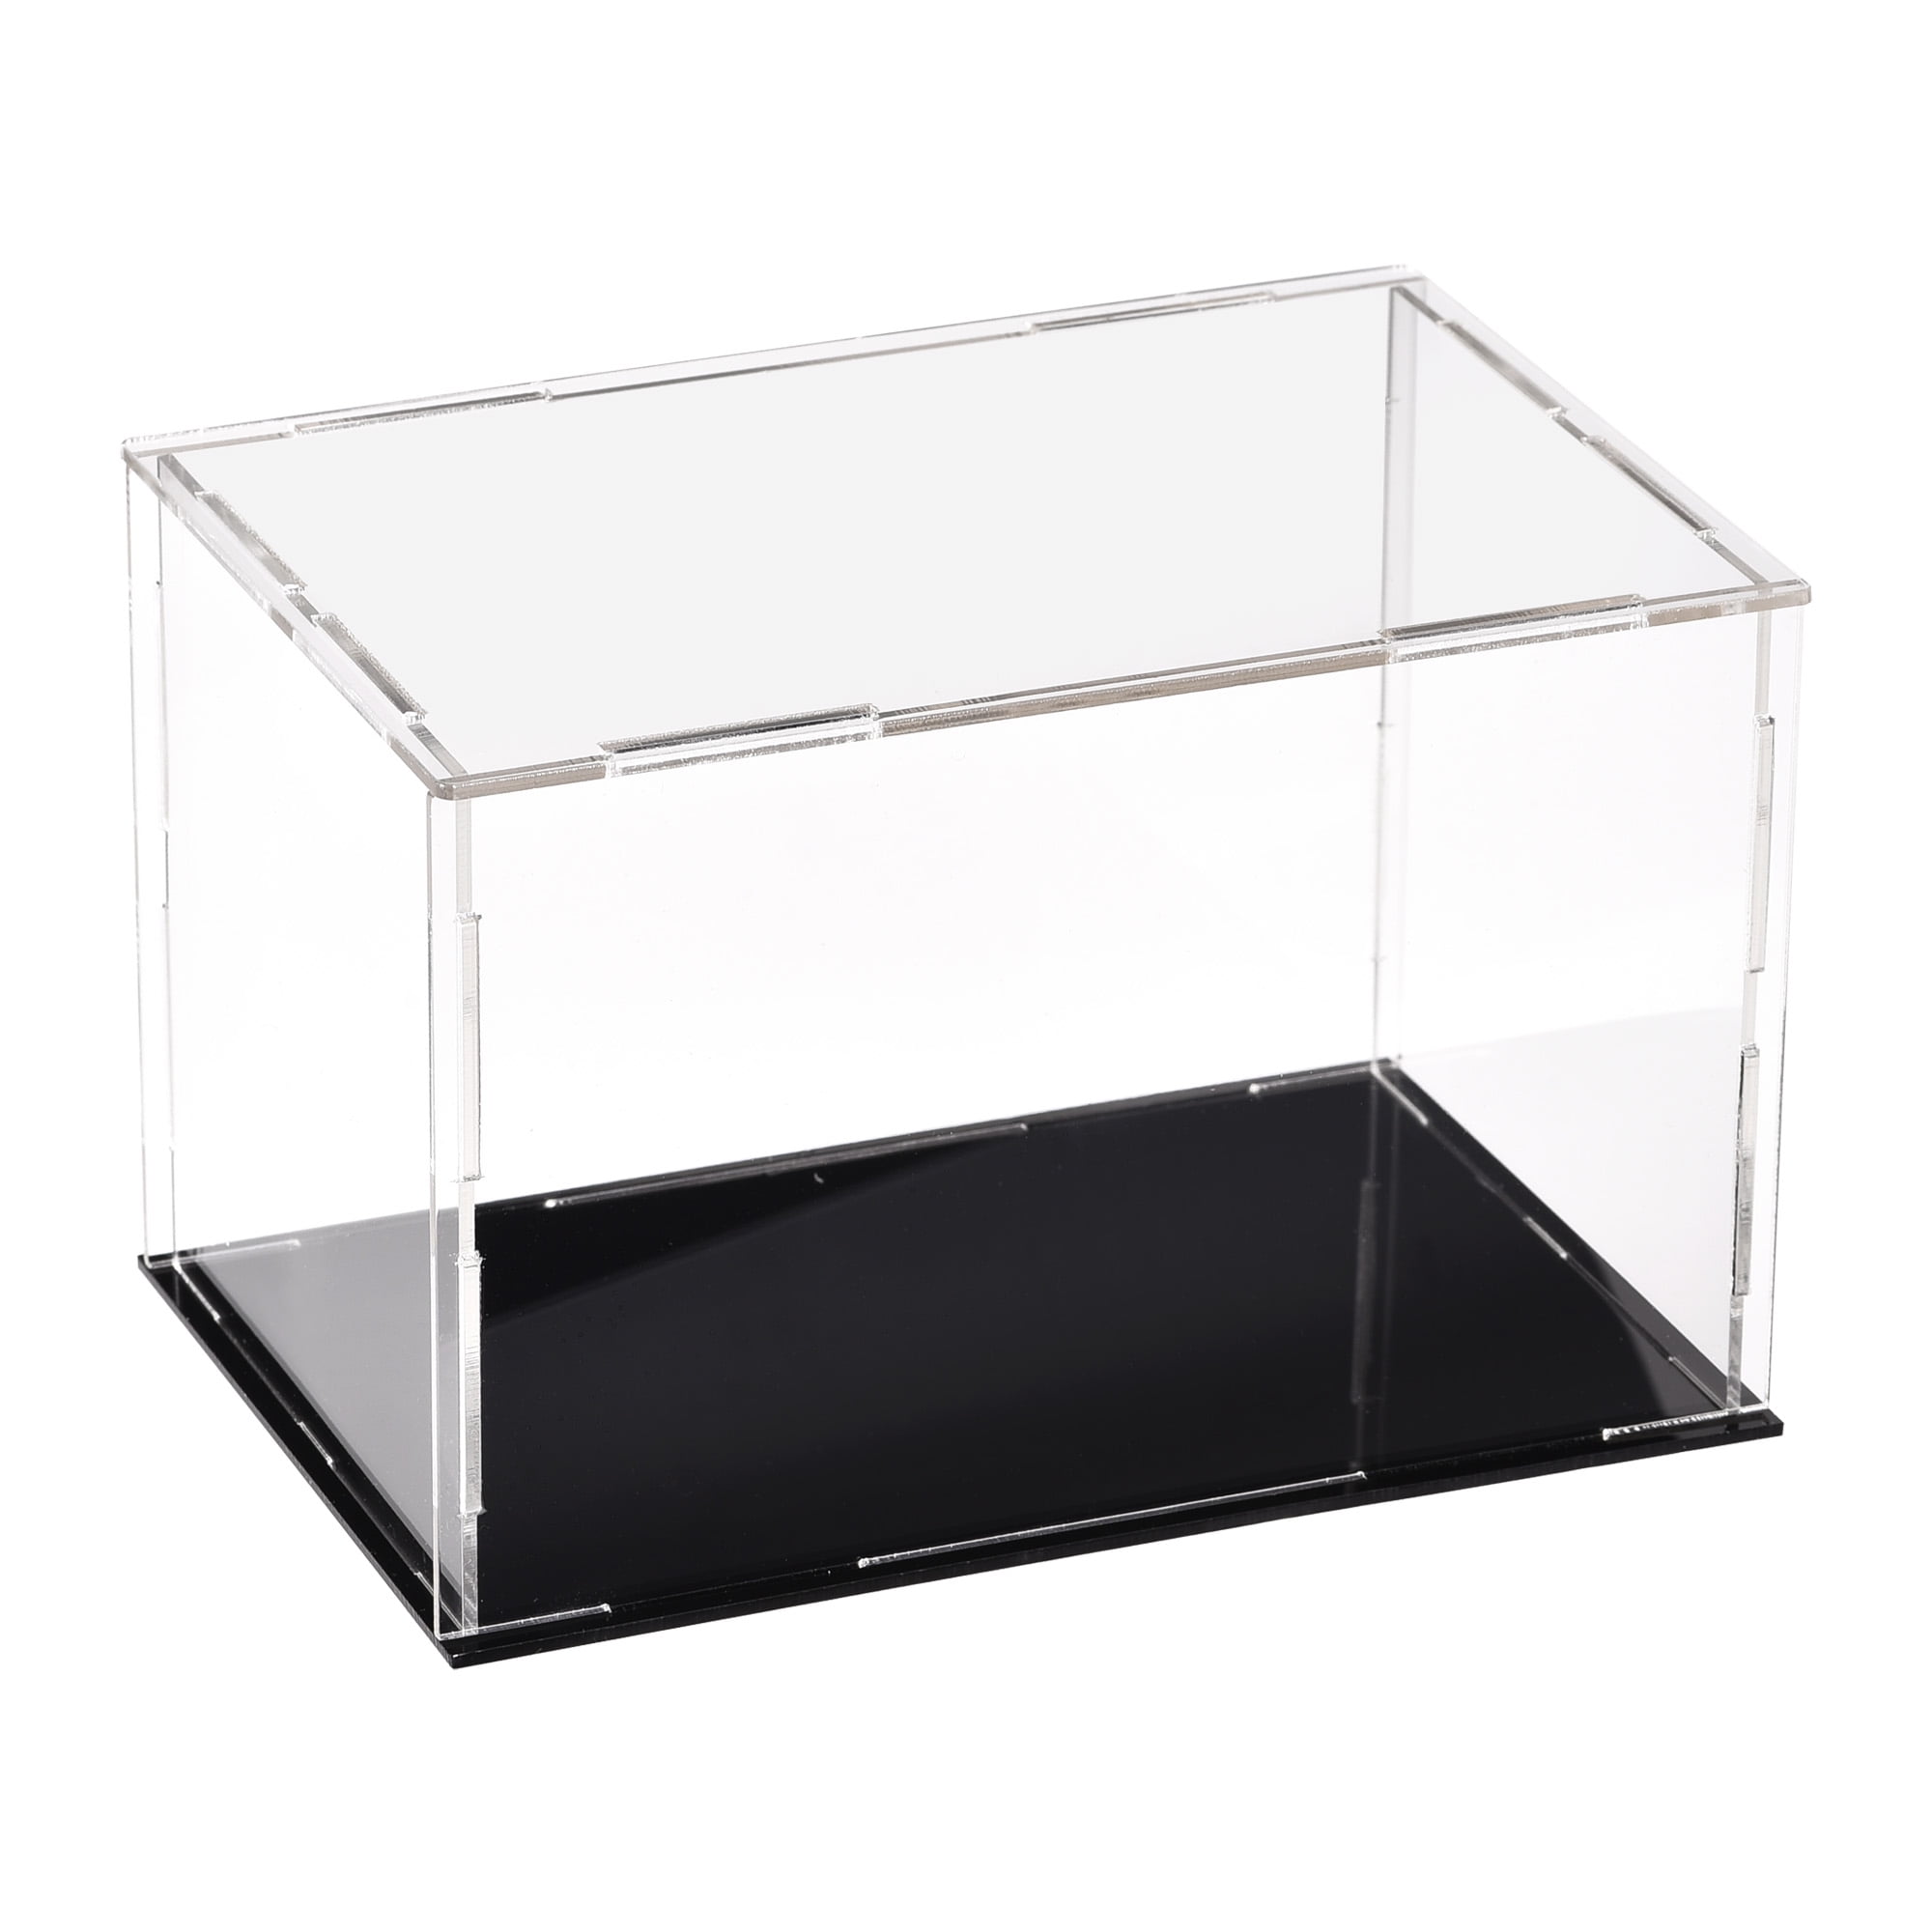 LANSCOERY Clear Acrylic Display Case Countertop Box Cube Organizer Stand Dustproof Protection Showcase for Action Figures/Toys/Collectibles 10x6x8 inch;25x15x20cm 